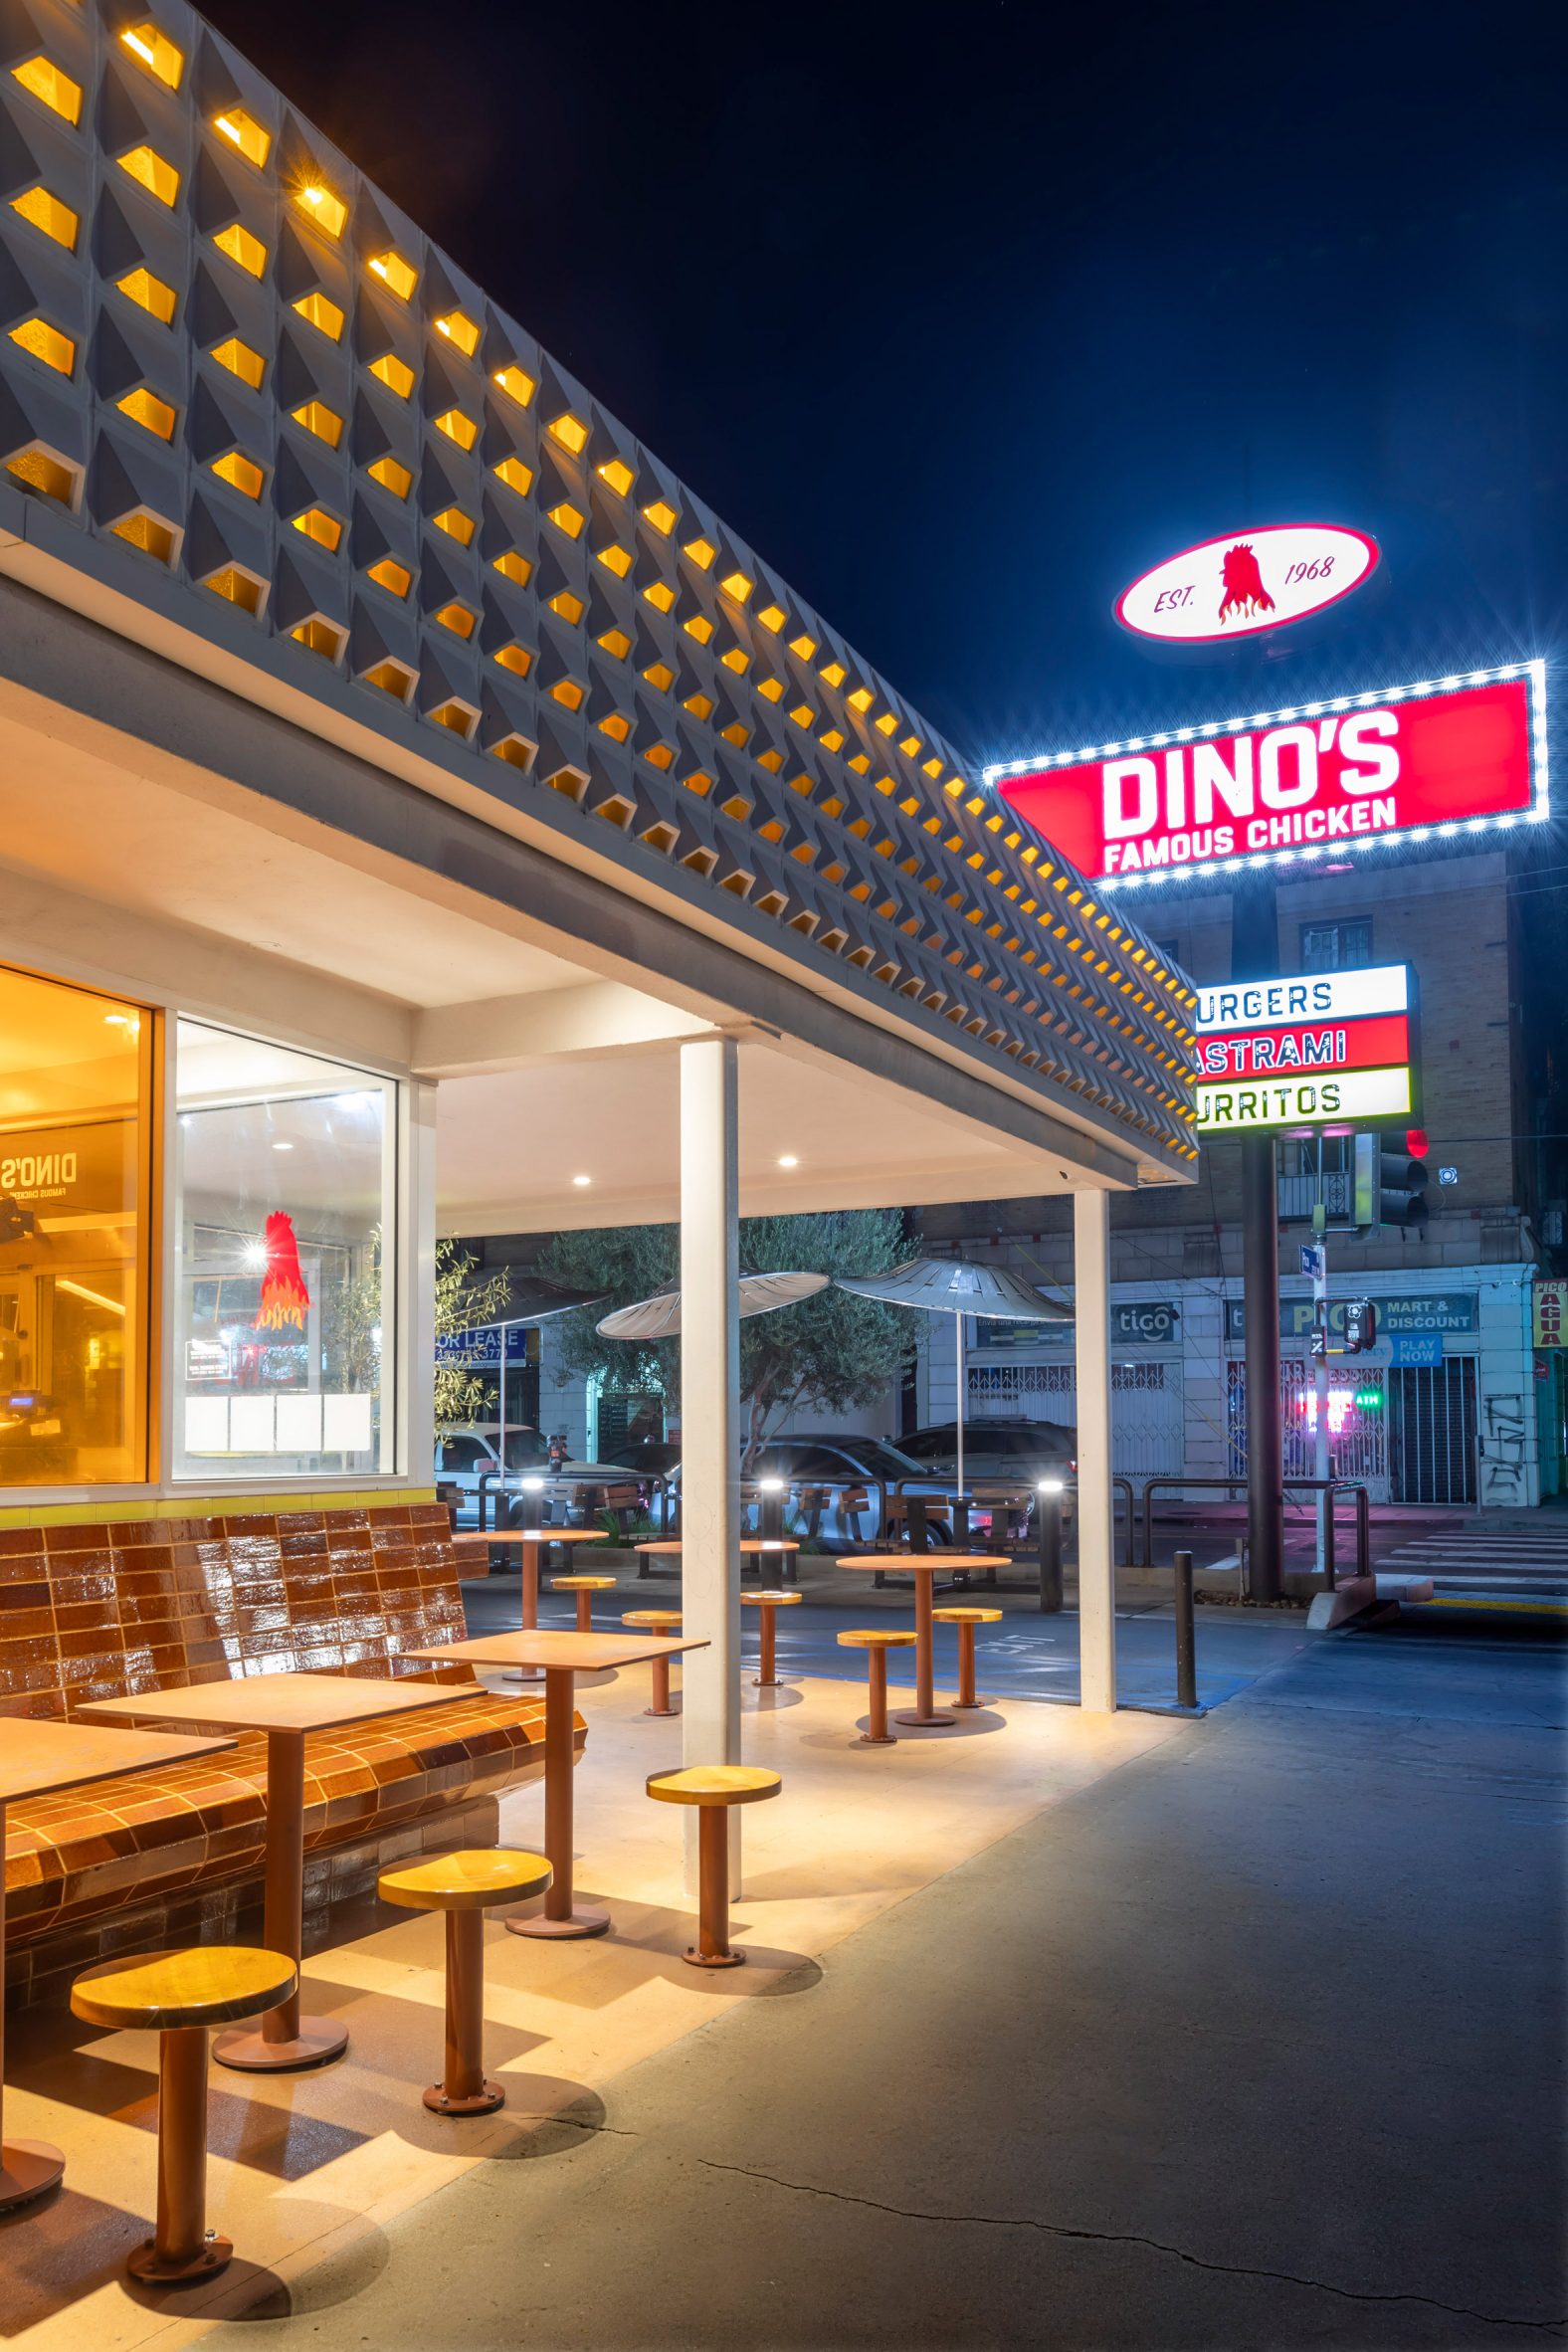 Exterior of Dino's Famous Chicken shop at night with large sign in the background